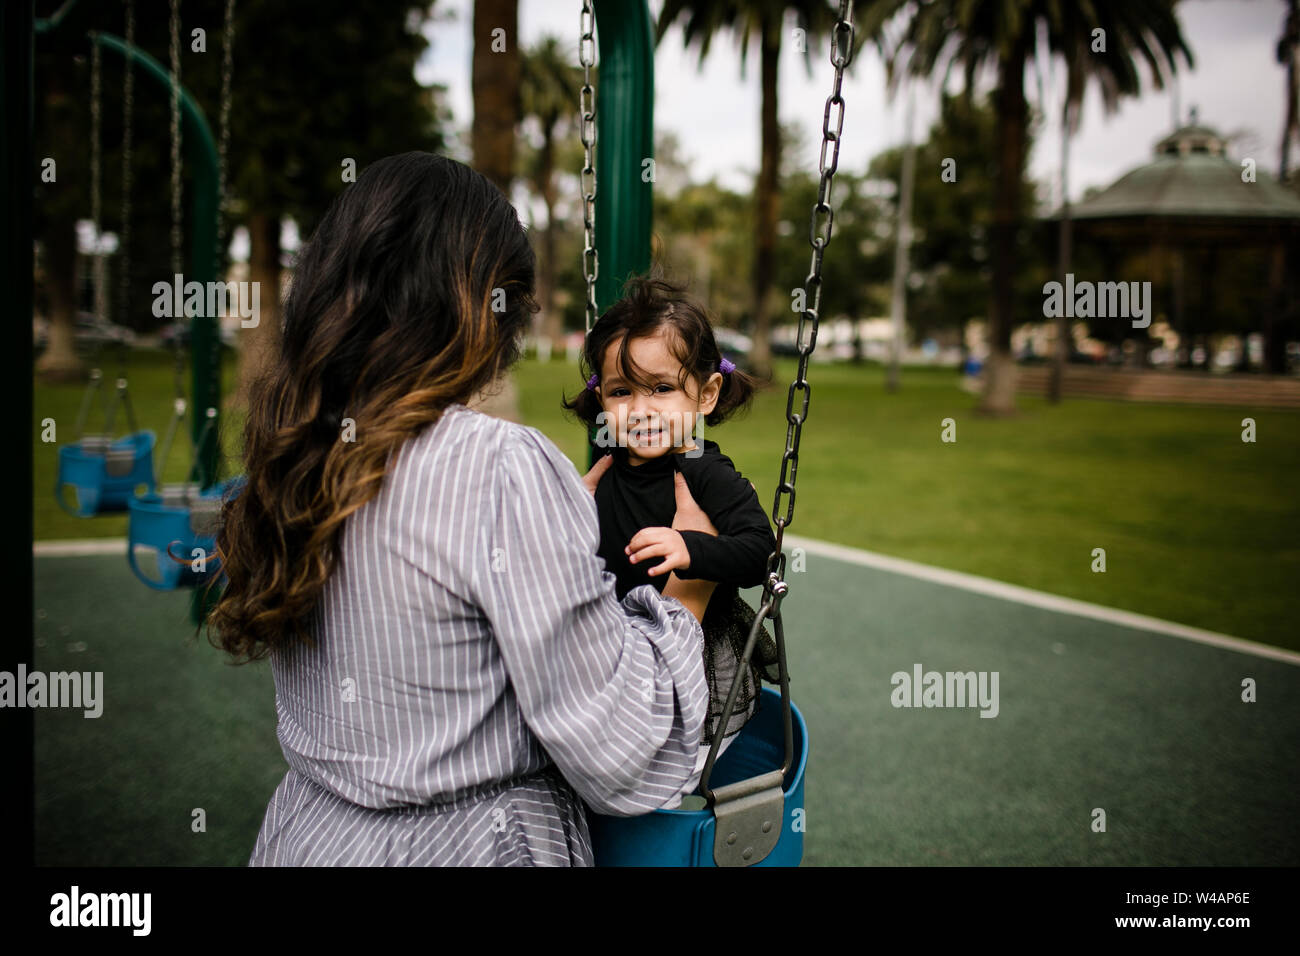 Mom putting daughter in swing at playground Stock Photo